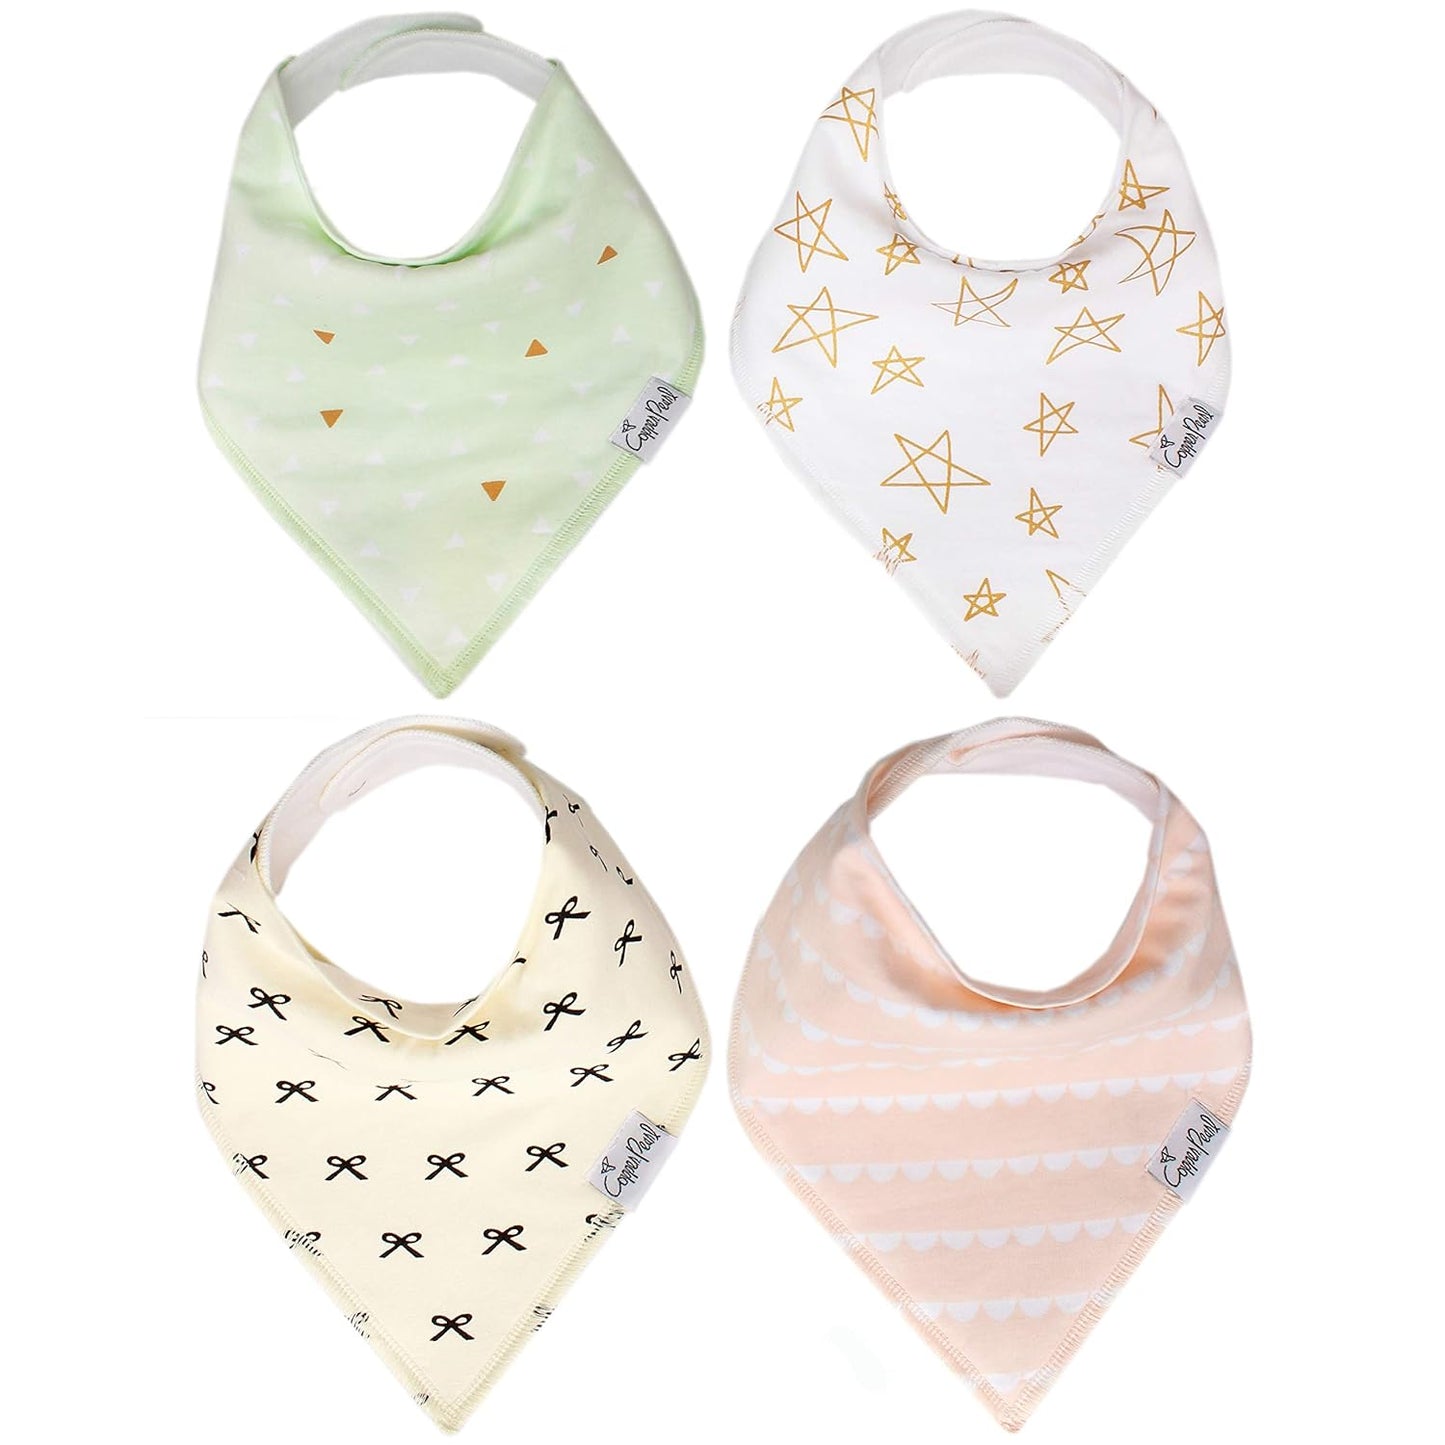 Copper Pearl Baby Bandana Drool Bibs for Drooling and Teething 4 Pack Gift “Alta, Soft Set of Cloth for Any Baby Girl or Boy, Cute Registry Ideas for Baby Shower Gifts